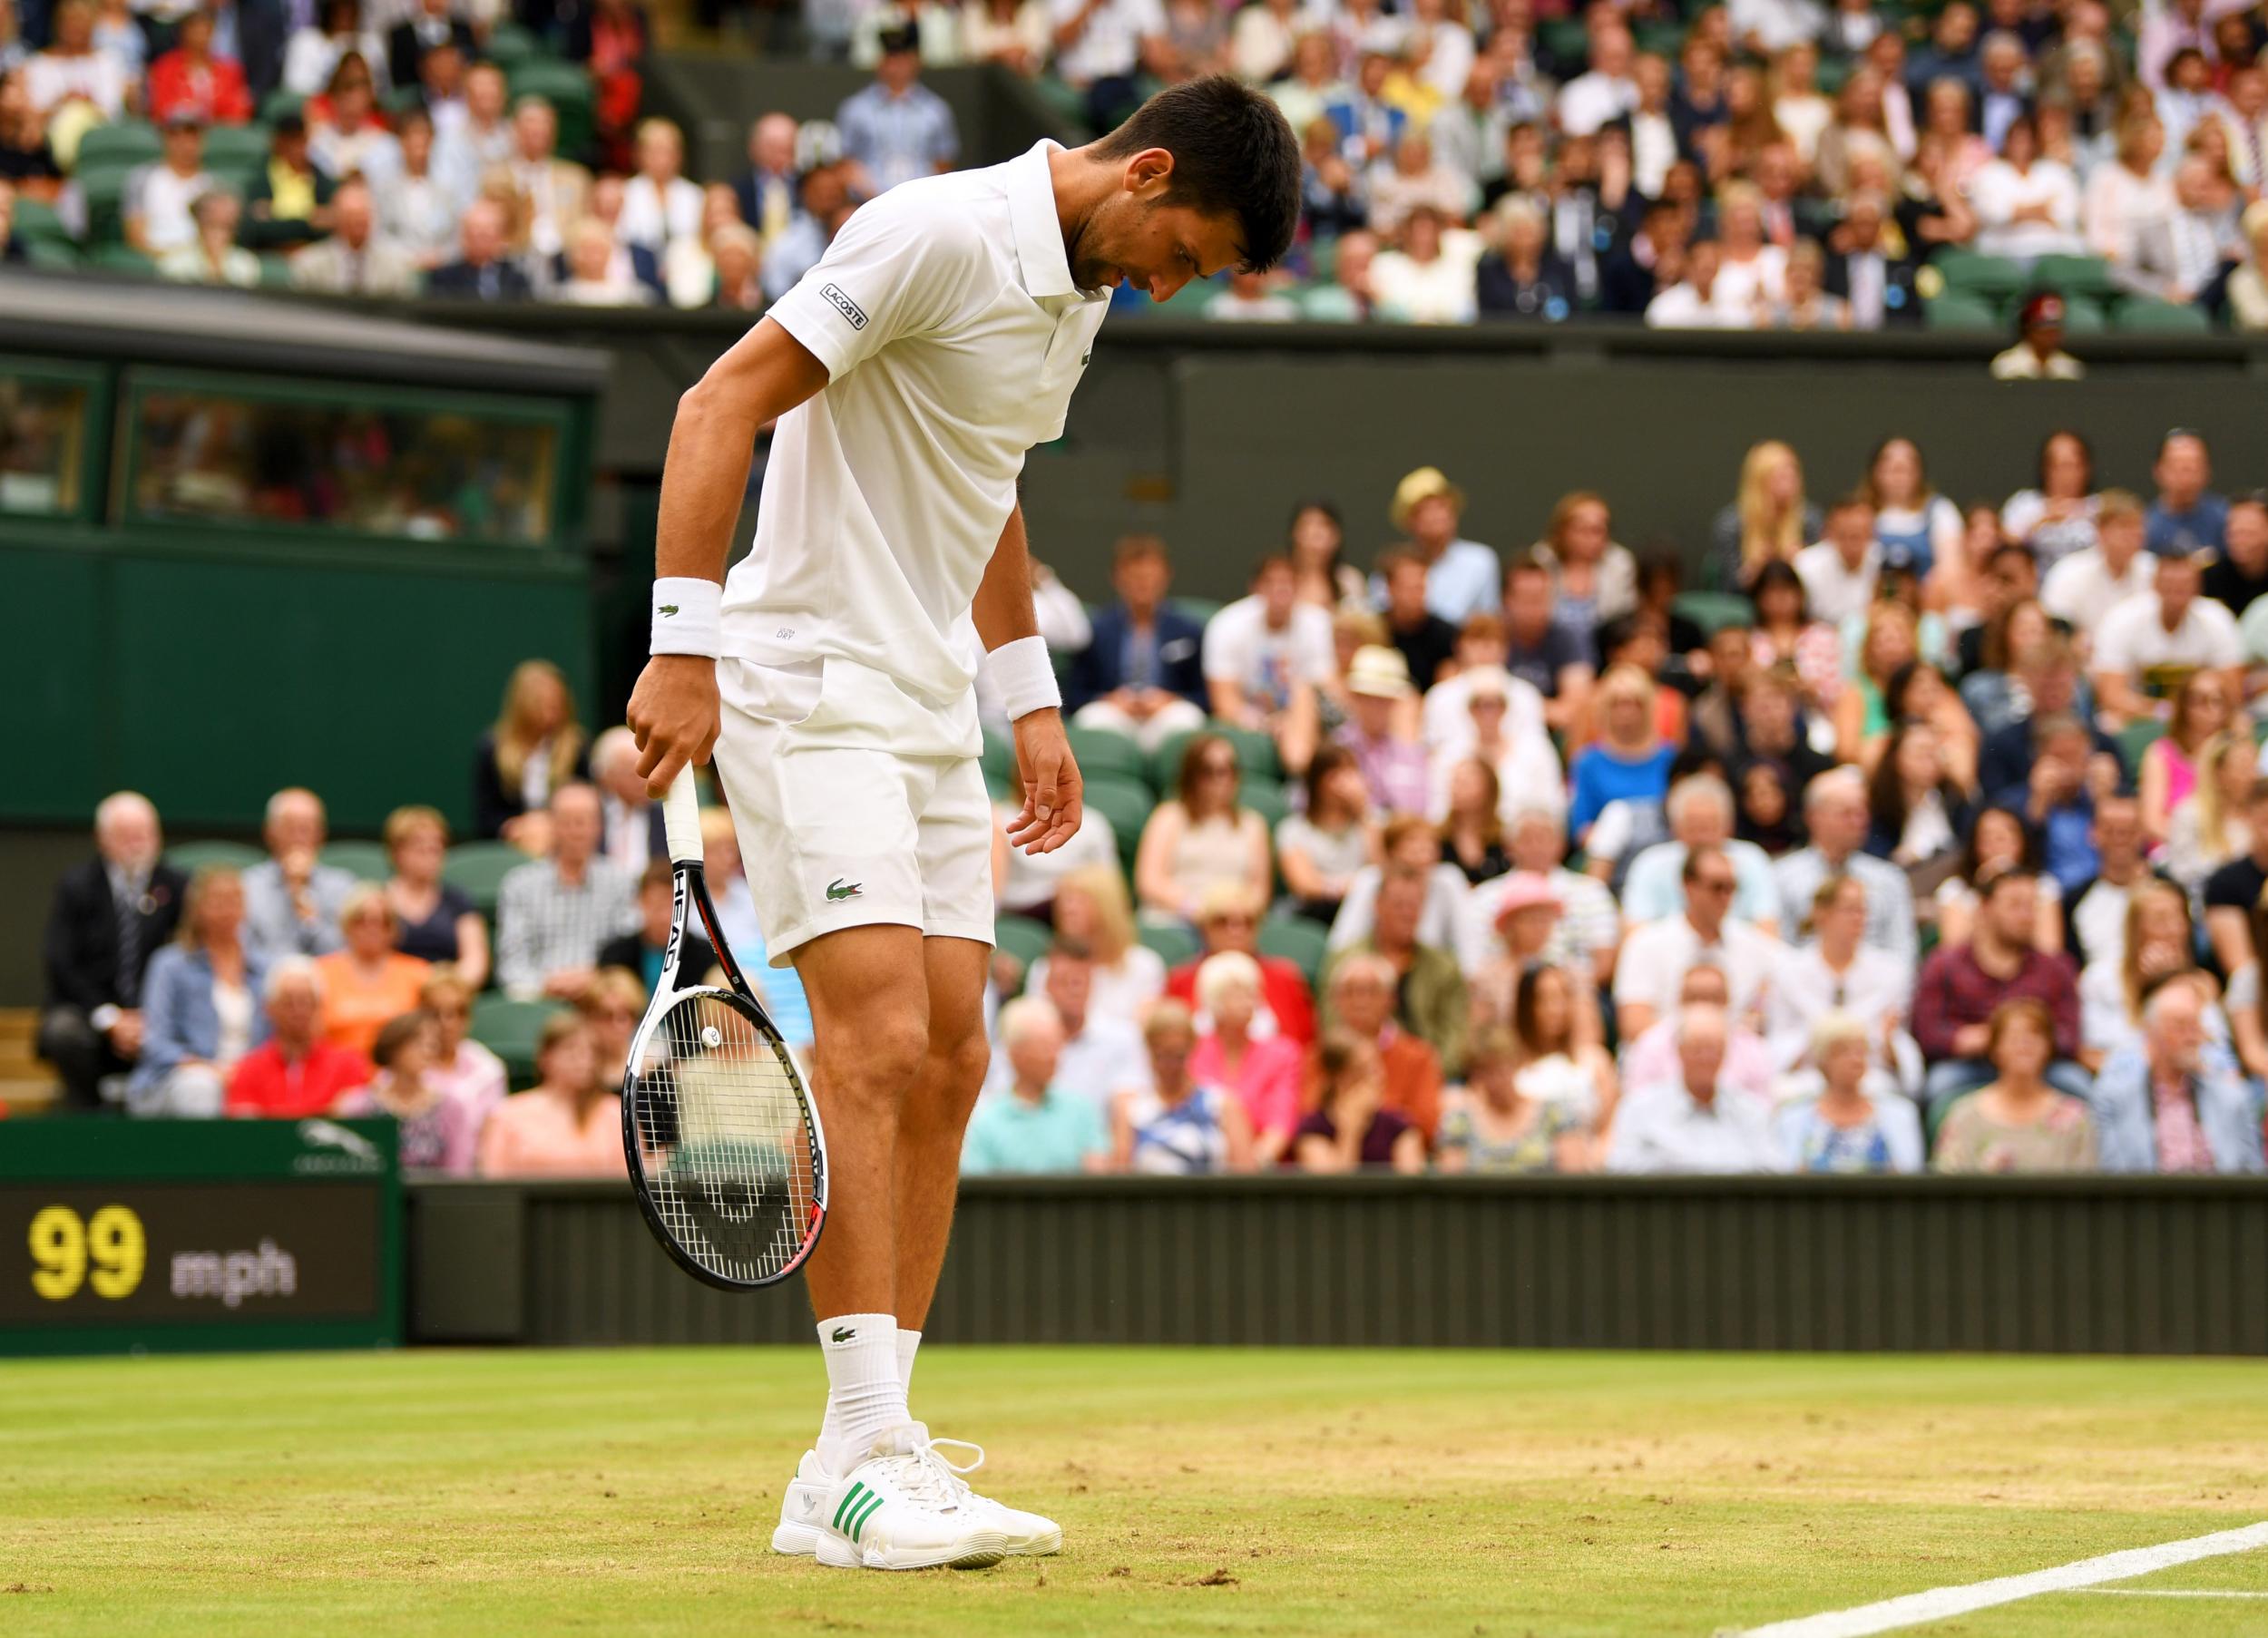 Djokovic was less than impressed with the state of the court